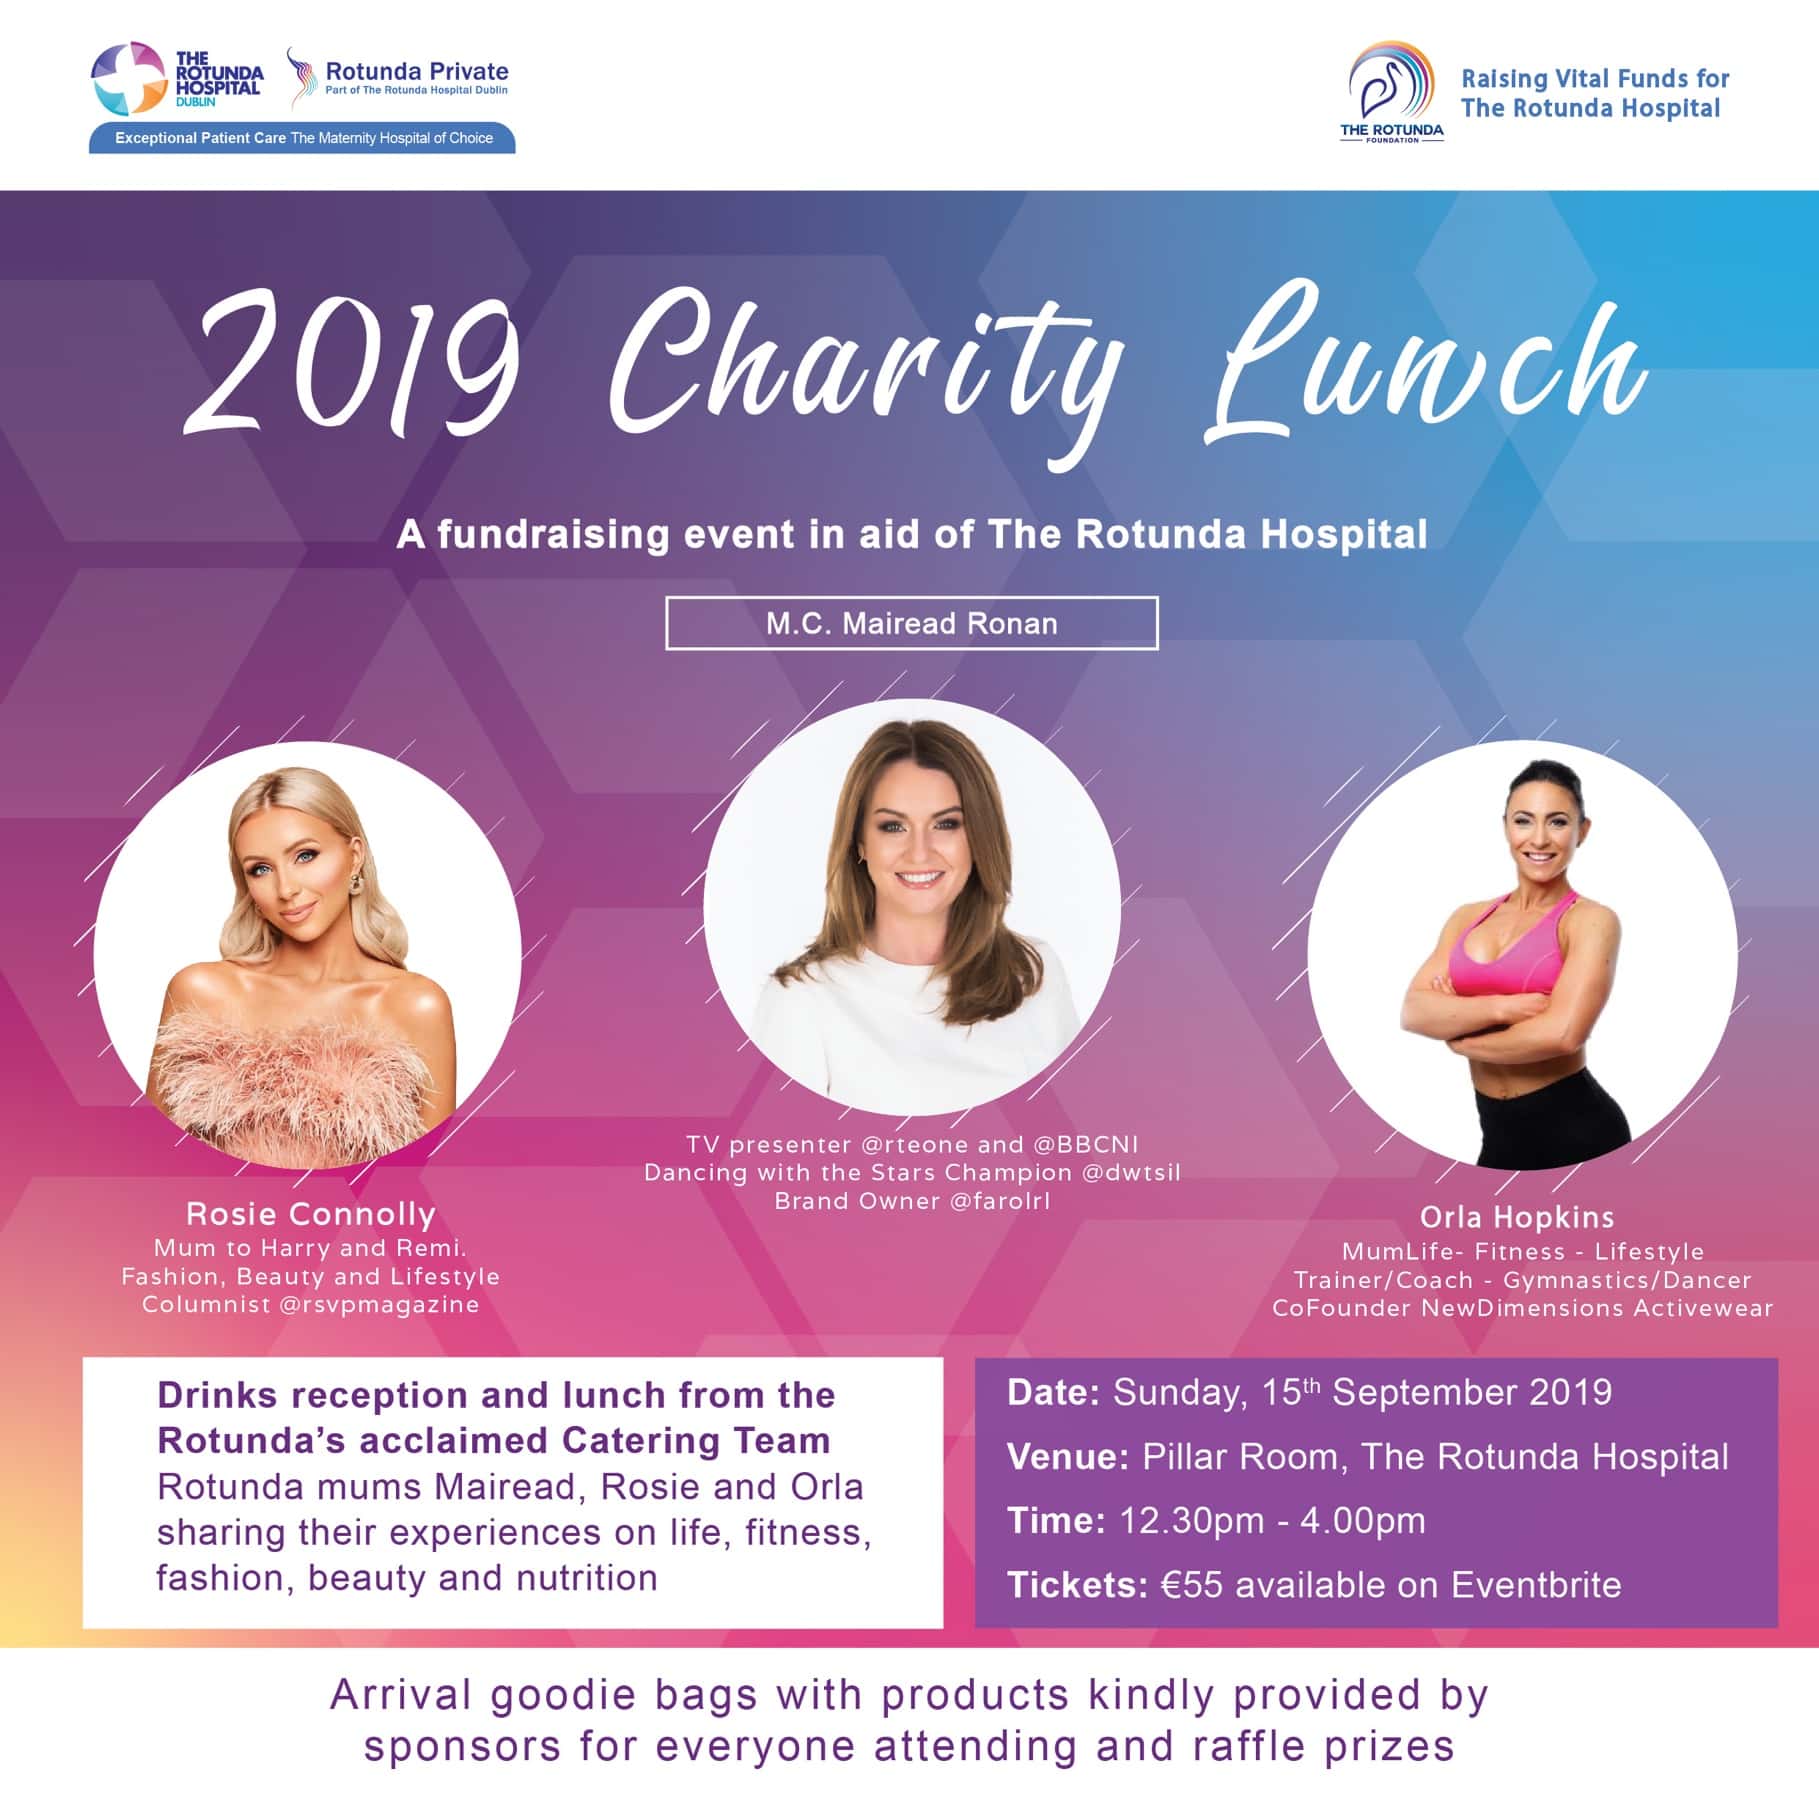 Join us in The Pillar Room for our 2019 Charity Lunch